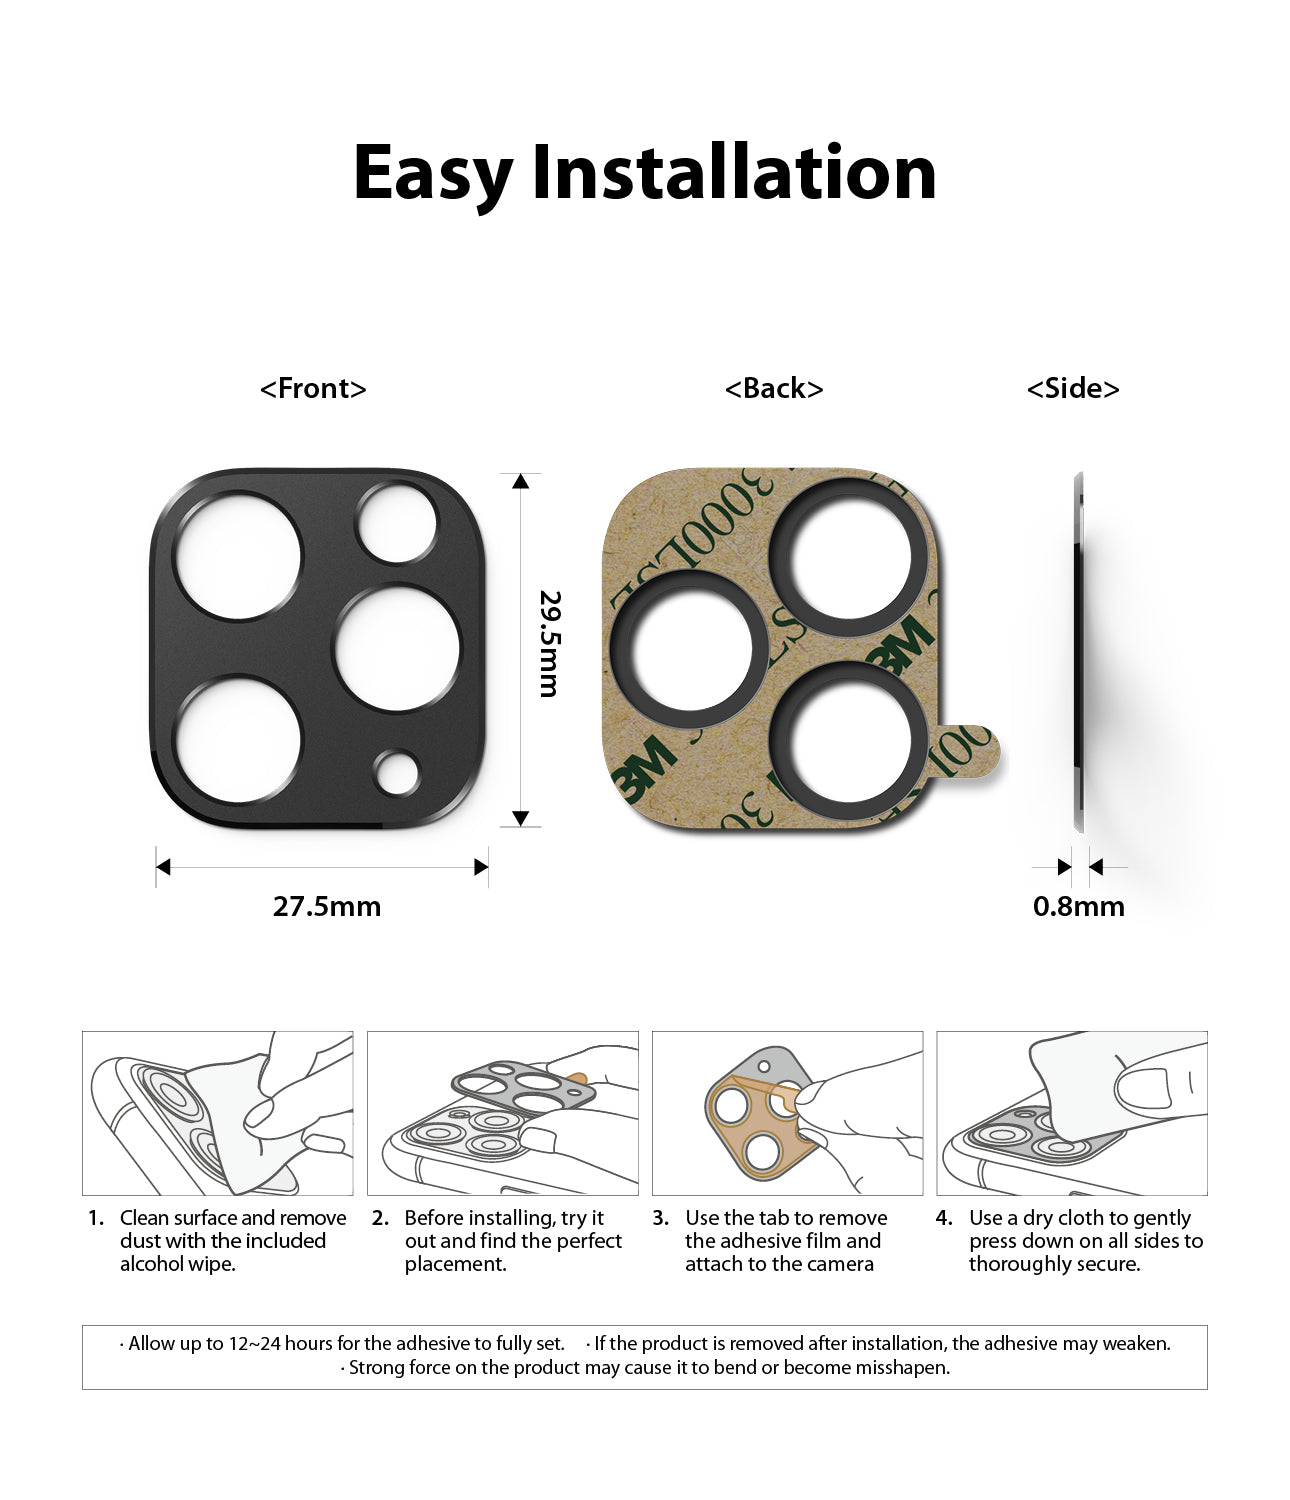 easdy installation guide